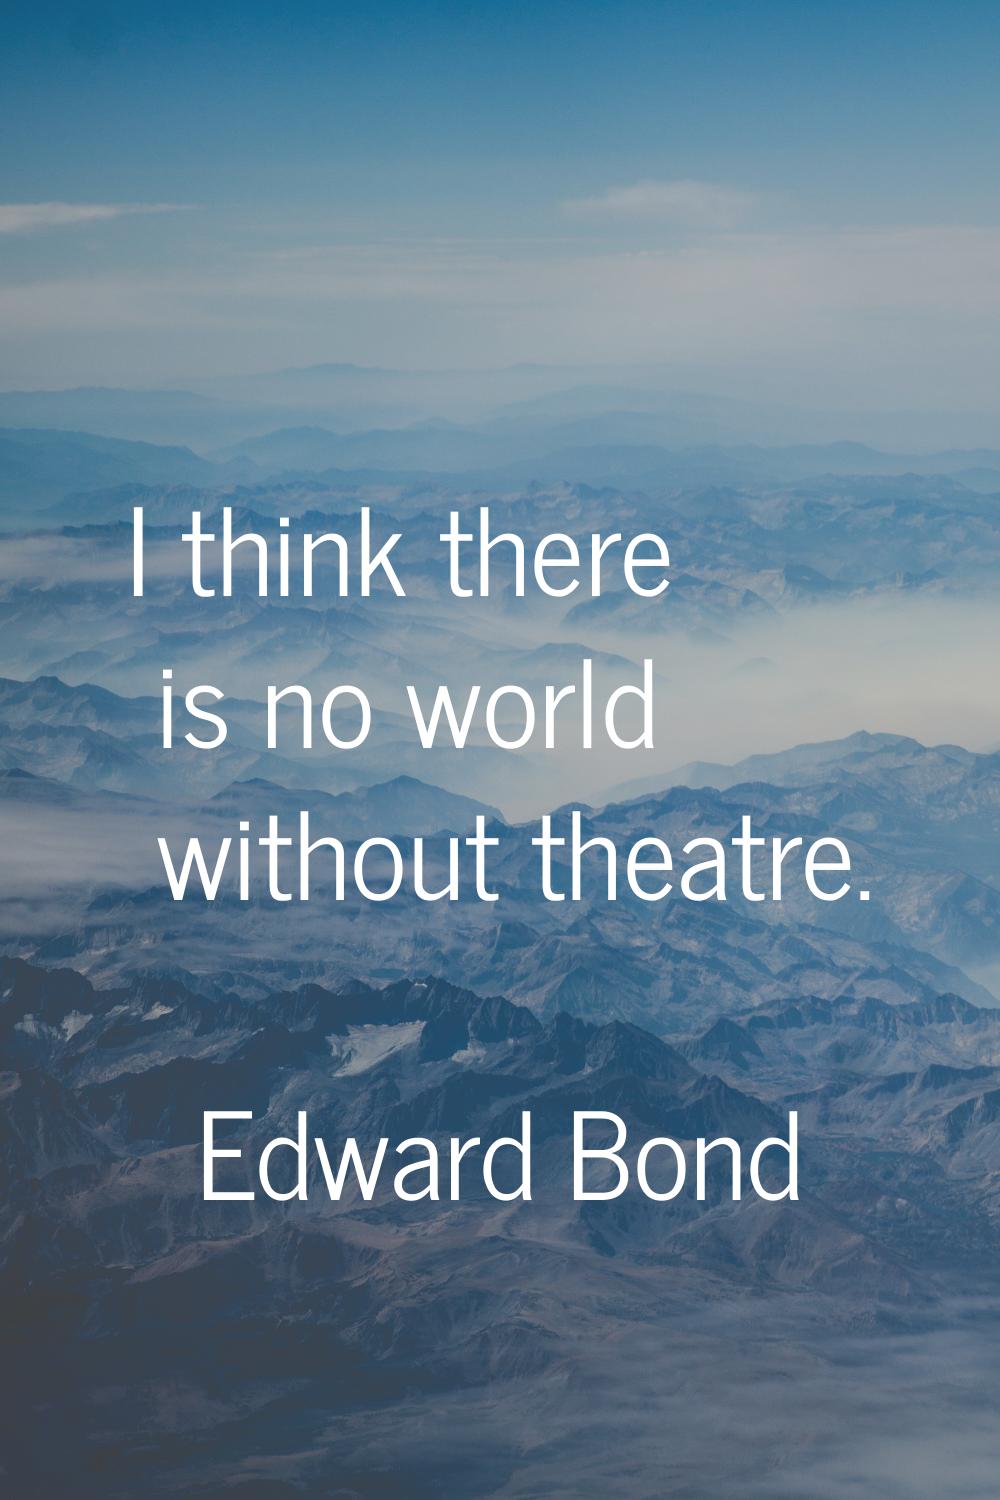 I think there is no world without theatre.